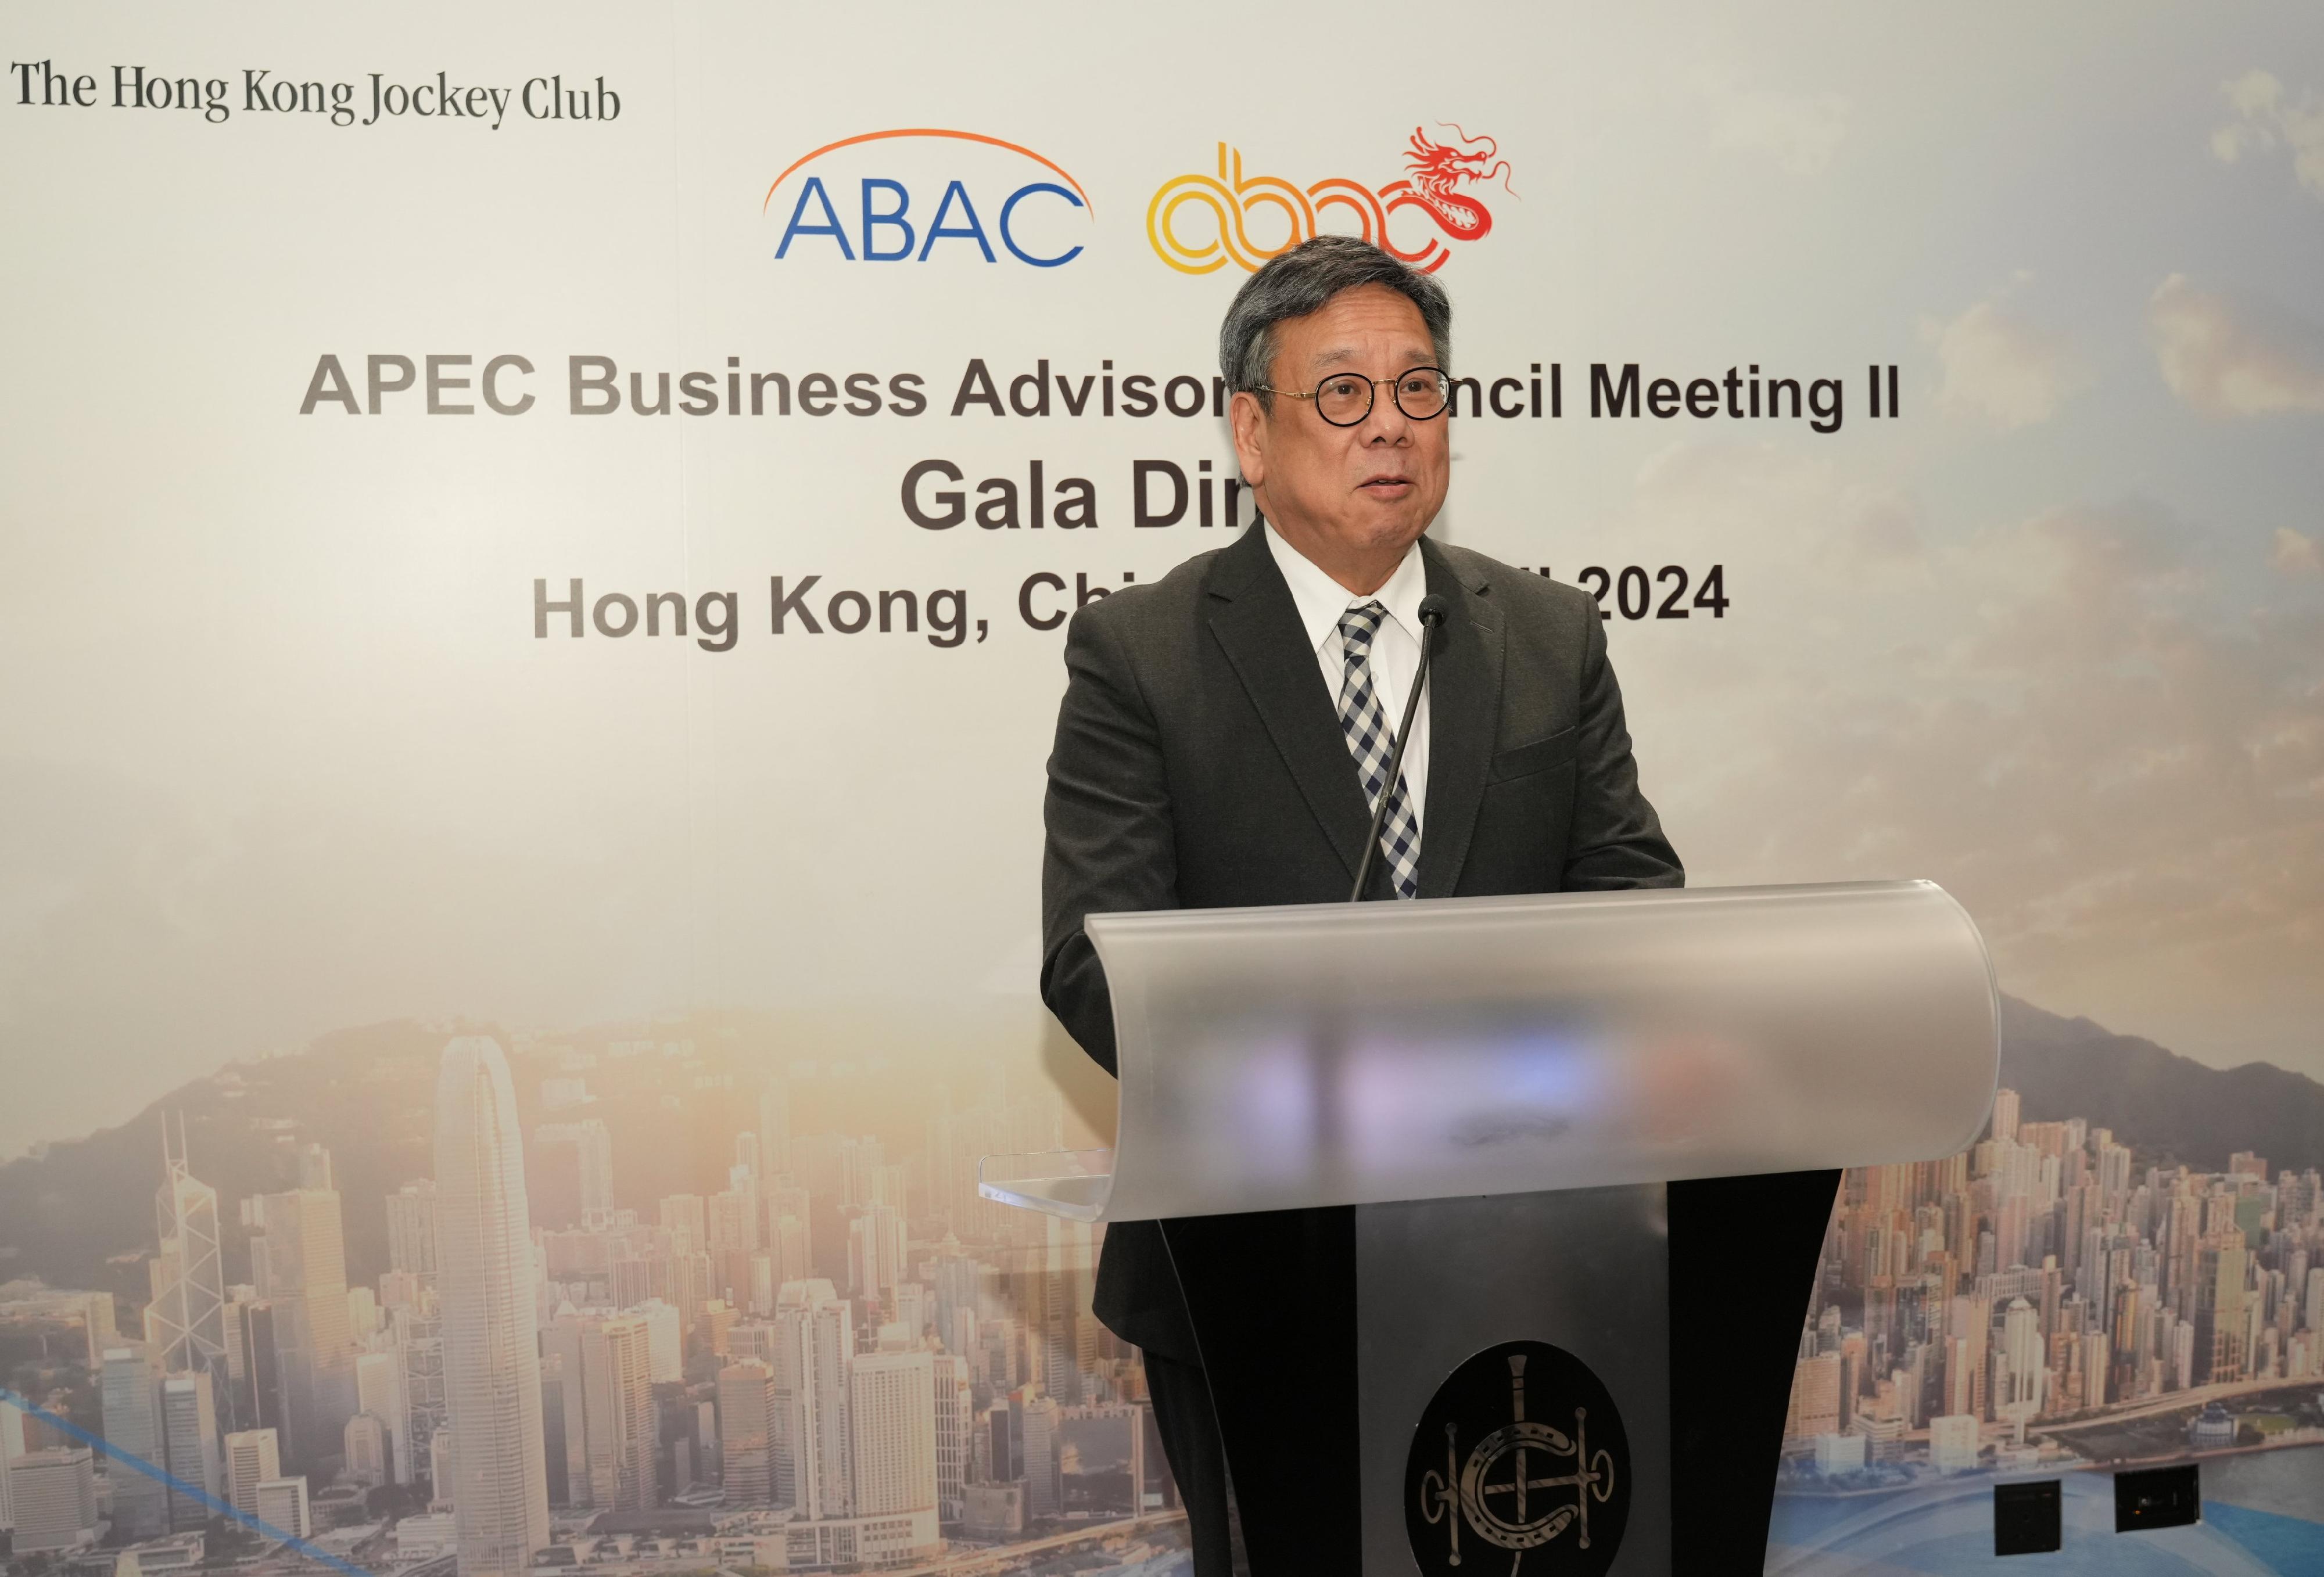 The second 2024 Asia-Pacific Economic Cooperation Business Advisory Council (ABAC) Meeting (the second Meeting) was held from April 22 to 25 in Hong Kong. The Secretary for Commerce and Economic Development, Mr Alegernon Yau, spoke at the Gala Dinner hosted by the Hong Kong Jockey Club (HKJC) for the ABAC delegates attending the second Meeting on April 24 and thanked the HKJC for hosting the dinner. 